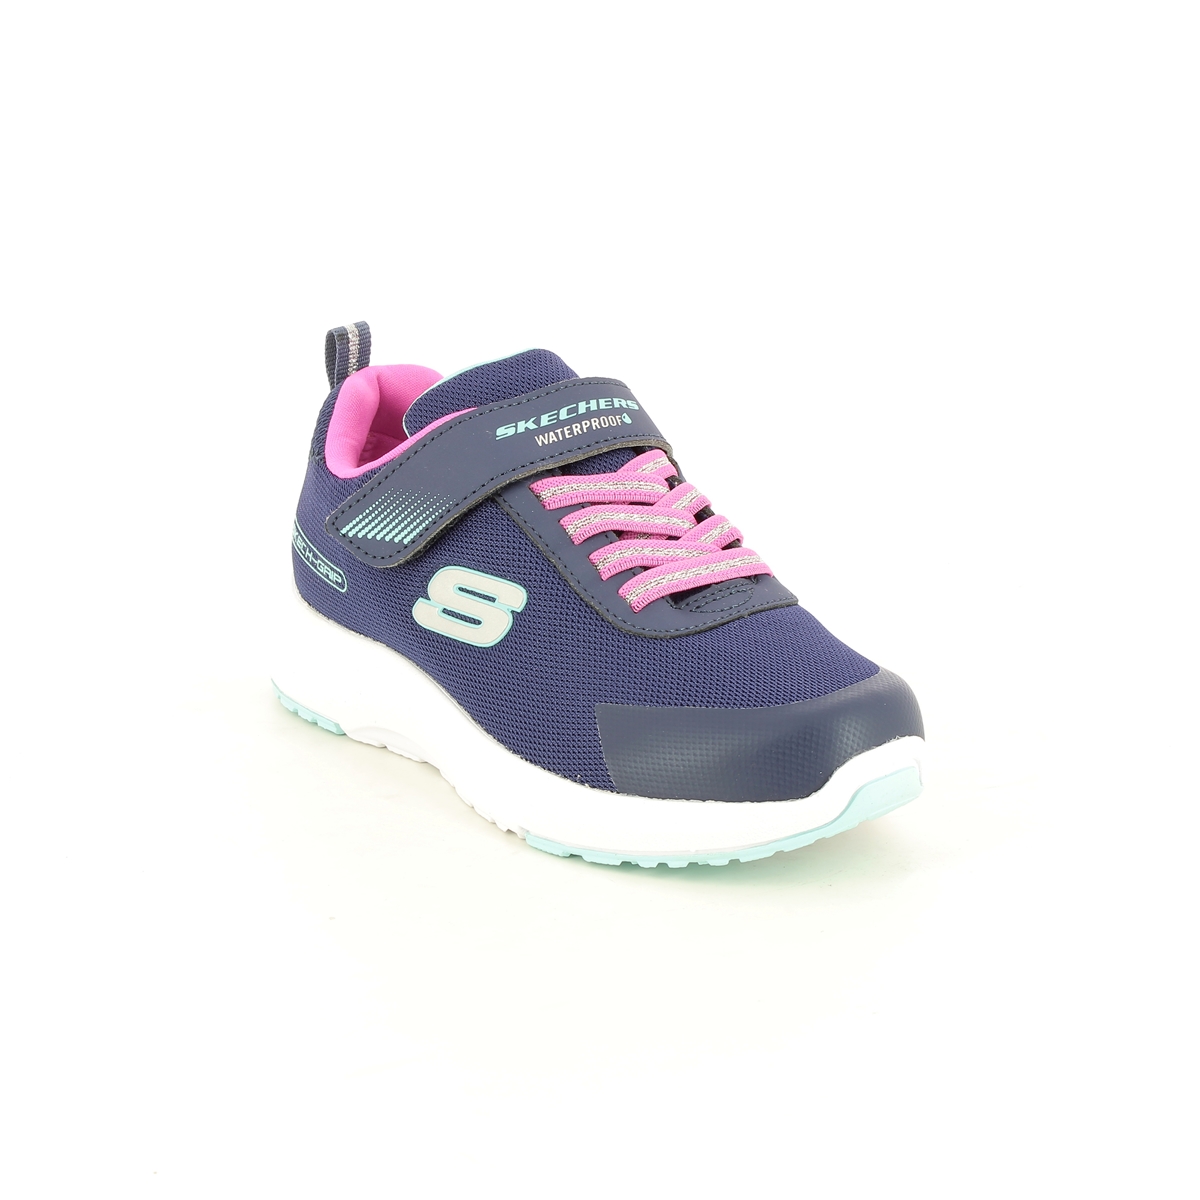 Skechers Dynamic Tex Navy Pink Kids Girls Trainers 302425L In Size 30 In Plain Navy Pink For kids